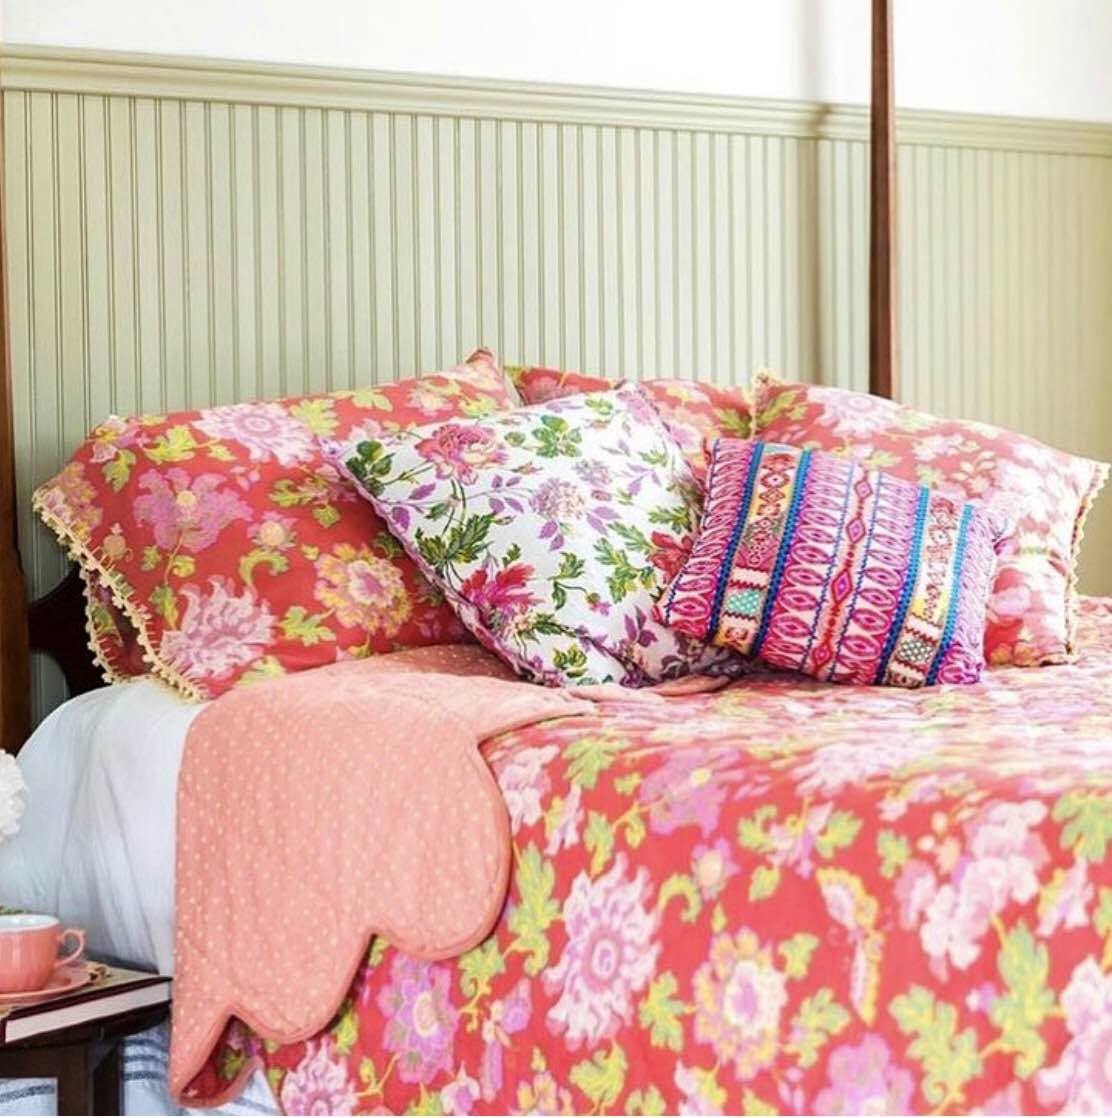 Check Out April Cornell For Beautiful Floral Home Furnishings